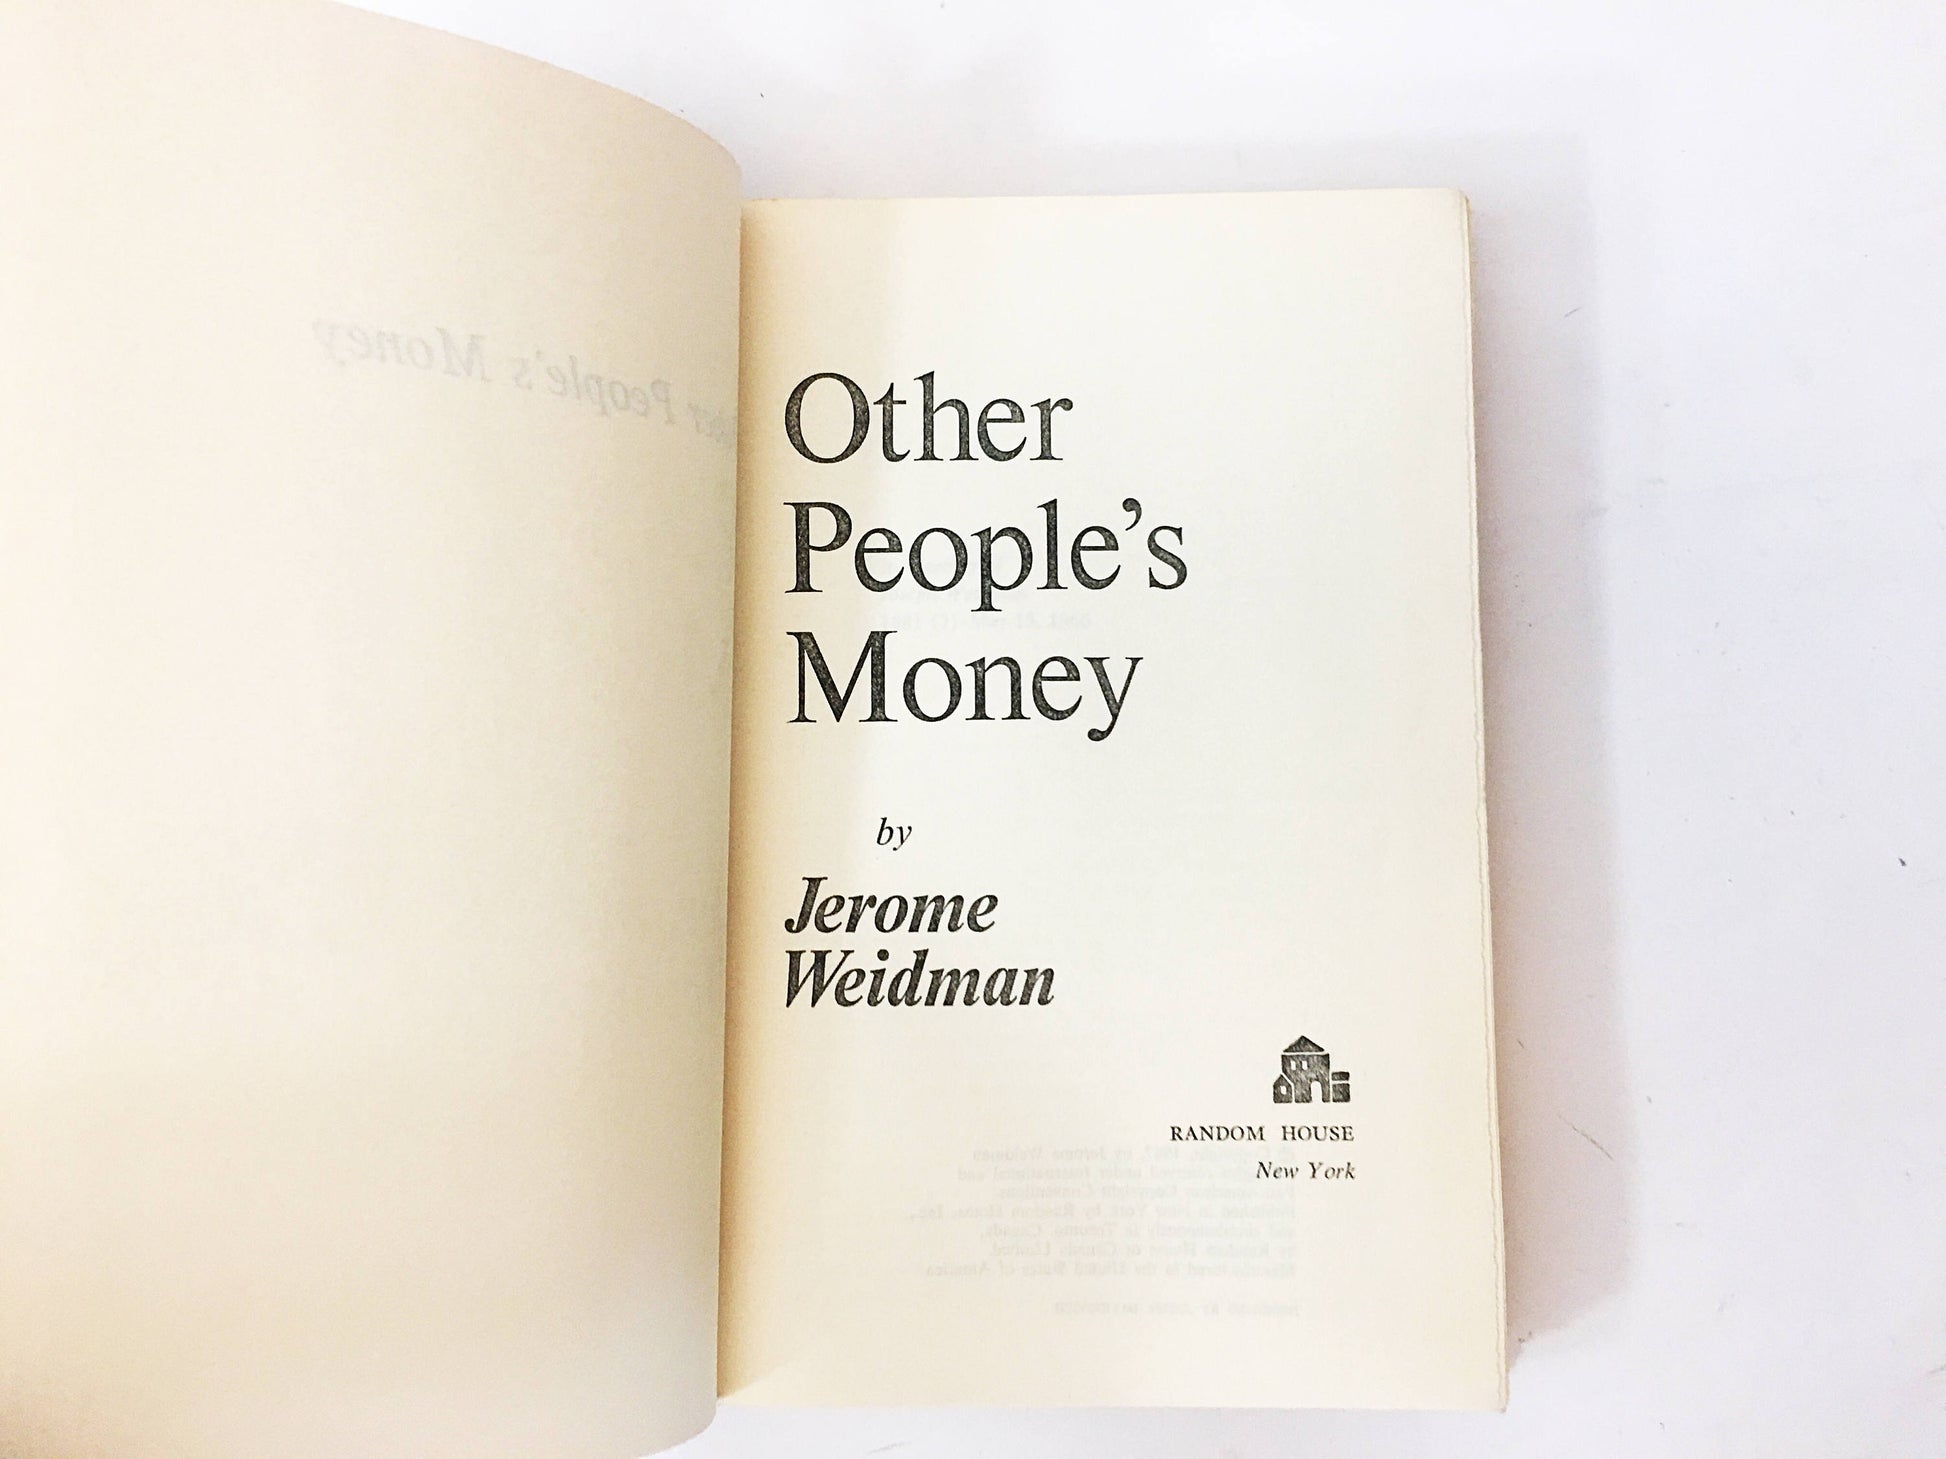 Other People's Money Vintage book circa 1967 by Jerome Weidman. Story turned movie of an orphan and his brother. Danny Devito, Gregory Peck